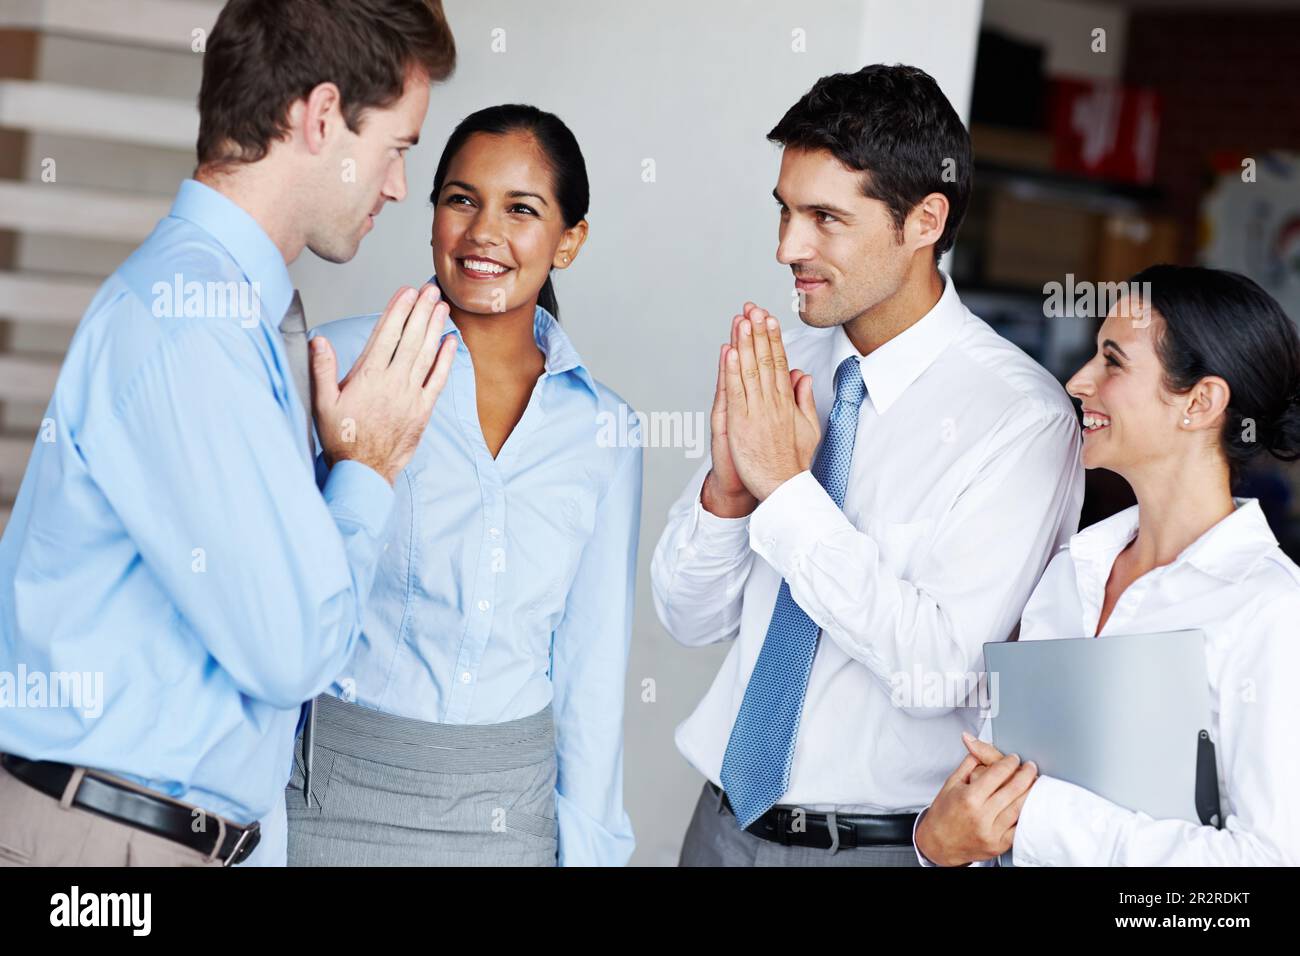 Zen-like respect. Two businessmen paying respects to one another by bowing with hands together. Stock Photo